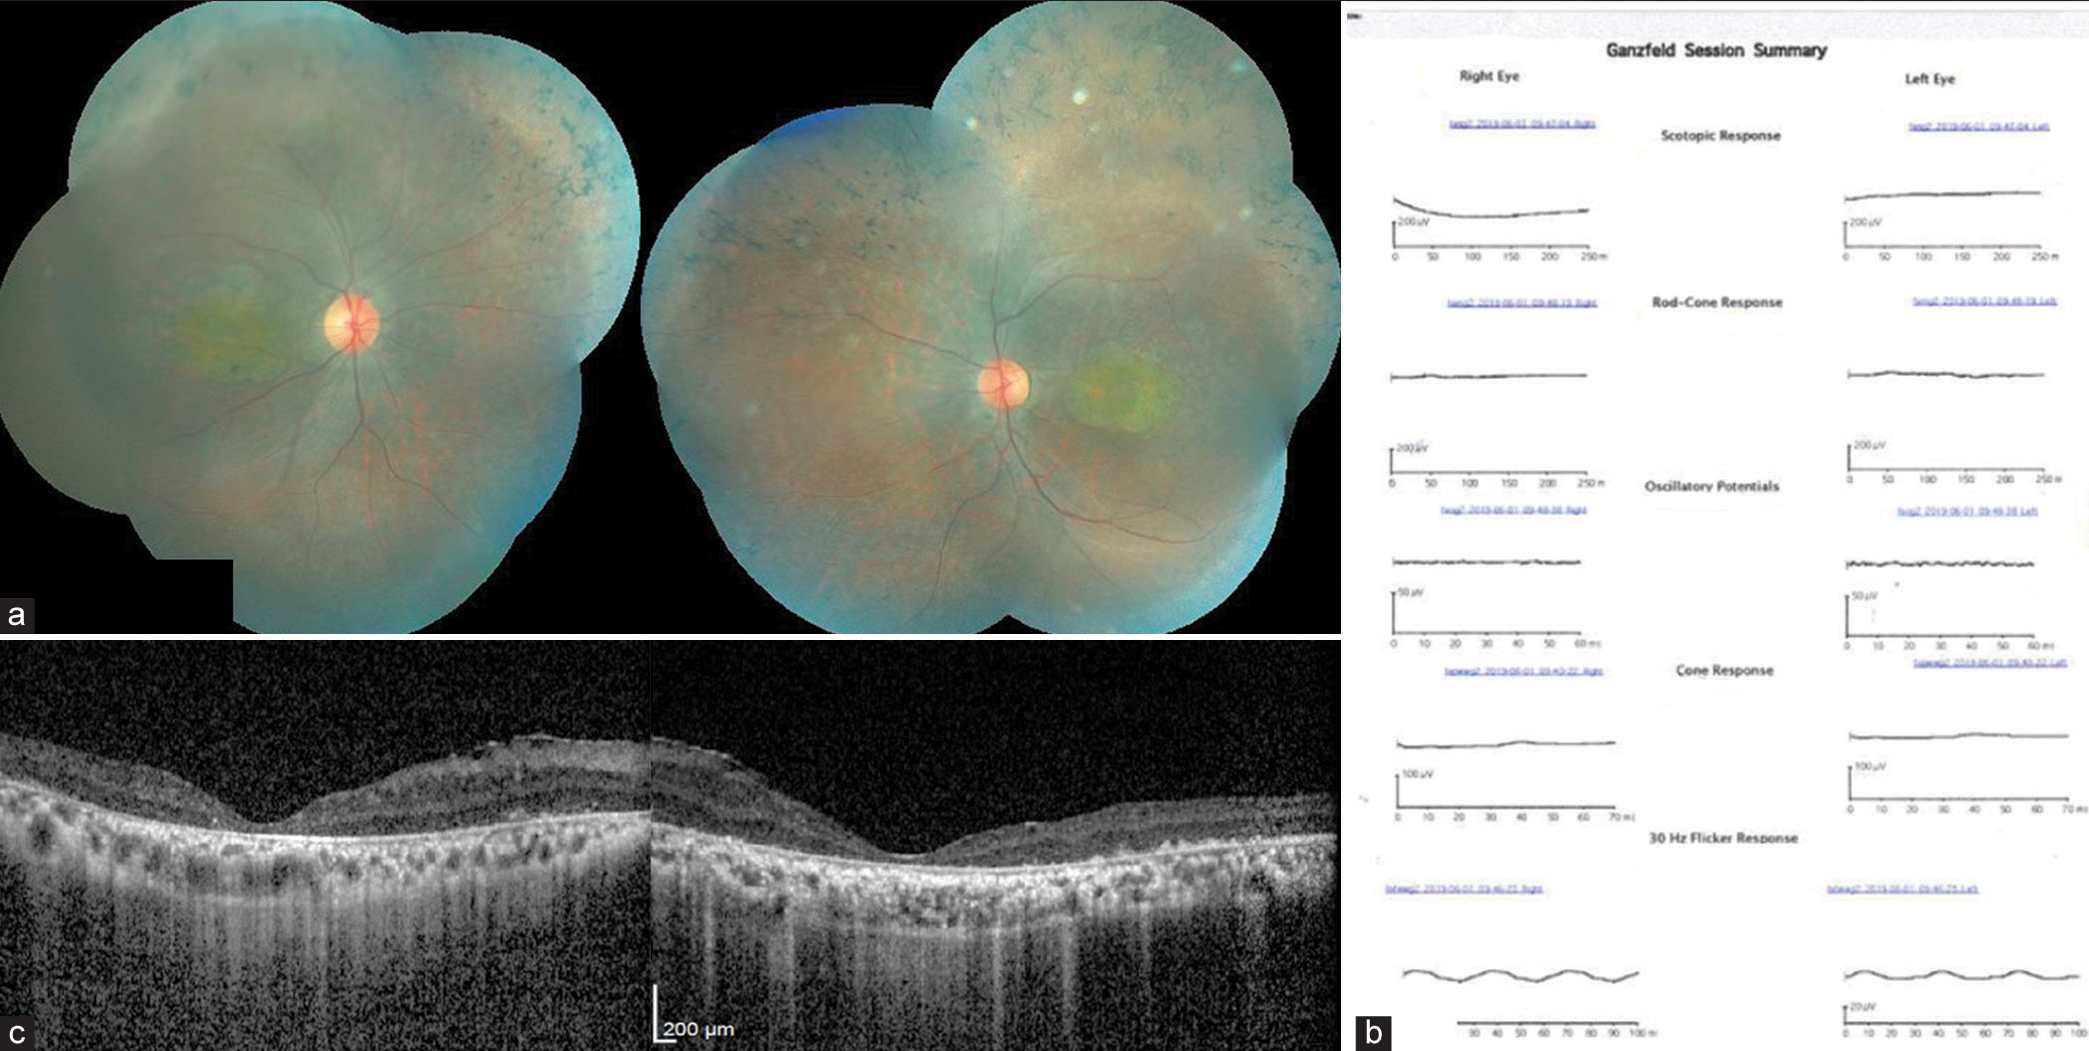 (a) Color fundus photography shows bony spicules in the periphery with maculopathy in both eyes. The optic disc and retinal vessels appear normal. (b) Electroretinogram report reveals a flat waveform in the scotopic and photopic test. (c) Epiretinal membrane can be seen on the inner retinal surface, foveal contour is maintained but there is diffuse foveal thinning and distinction of outer retinal layers cannot be made out on optical coherence tomography.